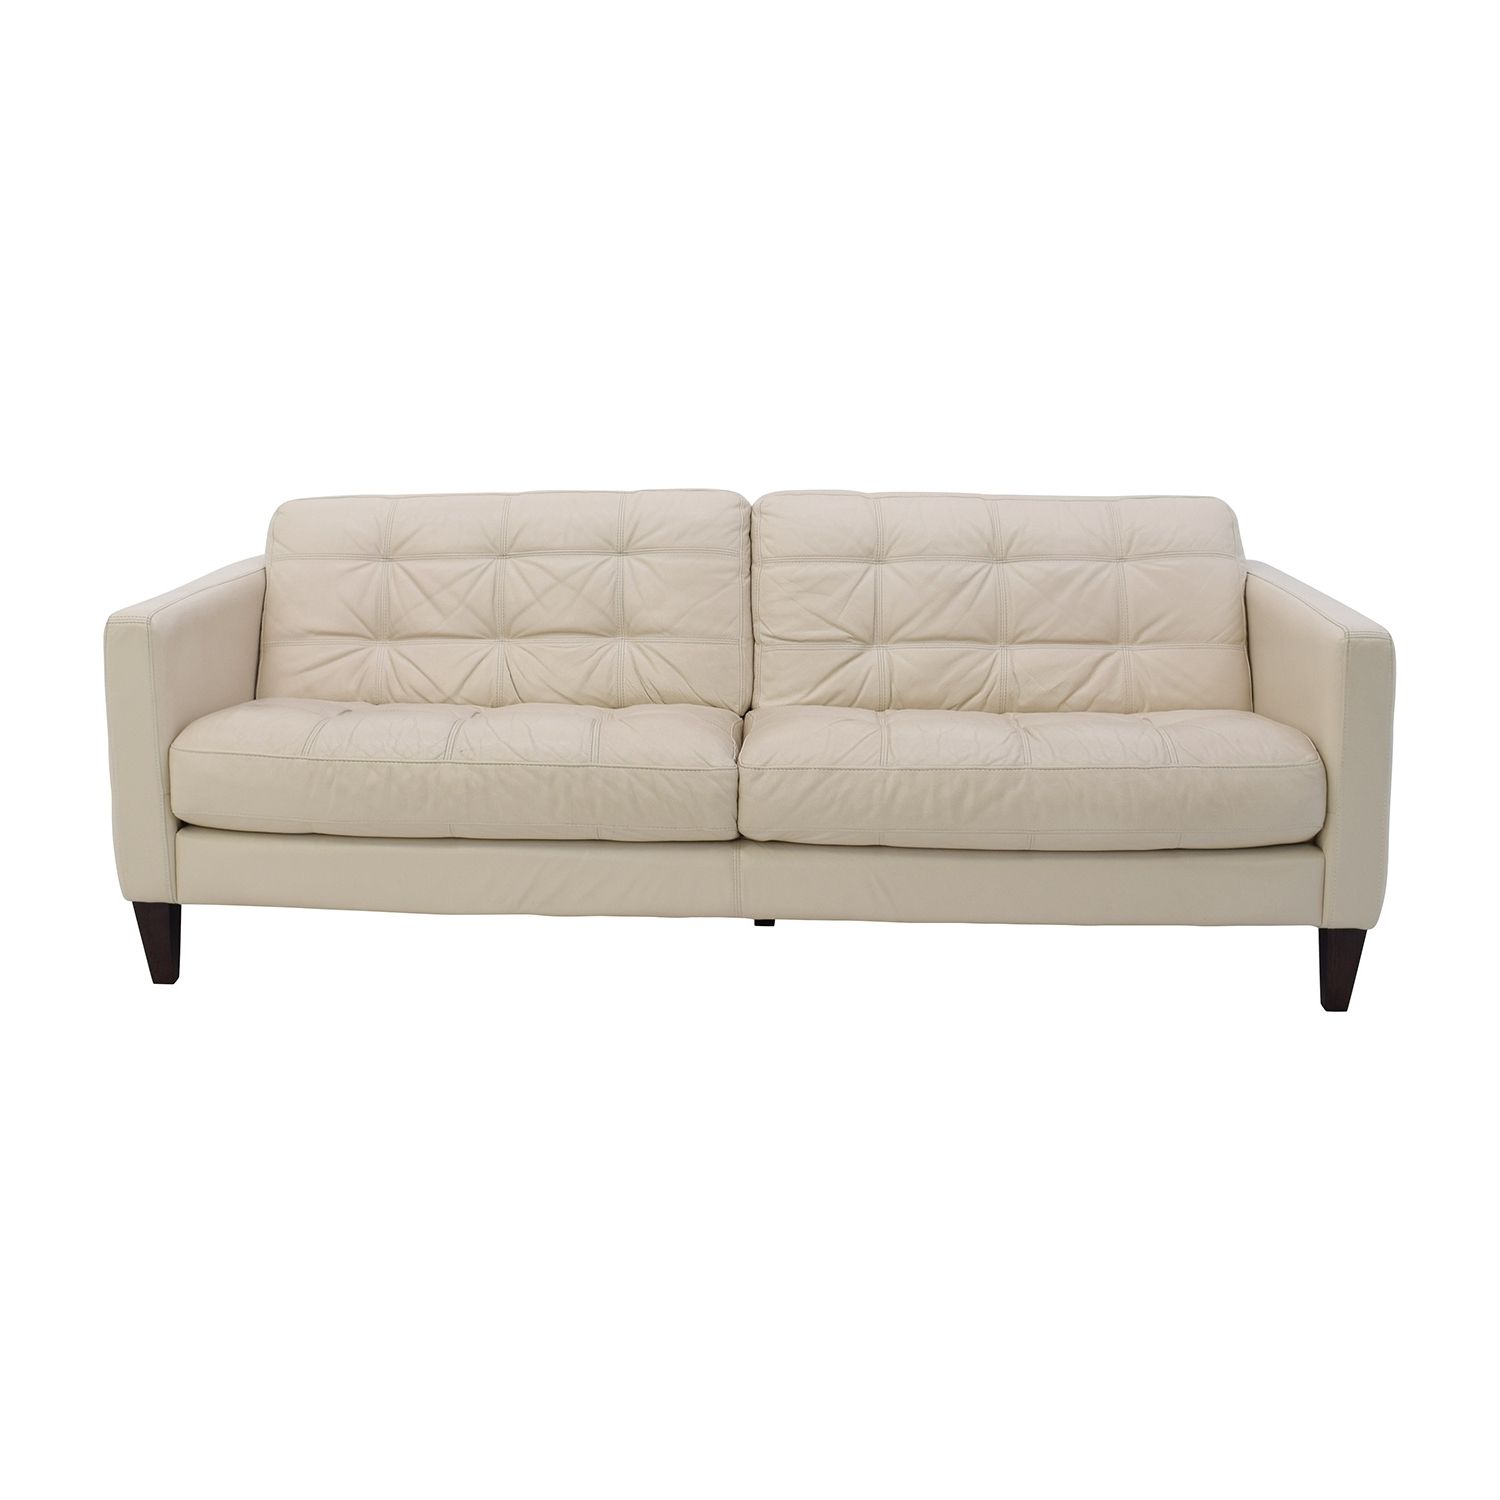 [%85% Off – Macy's Macy's Milan Pearl Leather Sofa / Sofas Inside Famous Macys Leather Sofas|macys Leather Sofas Inside Well Known 85% Off – Macy's Macy's Milan Pearl Leather Sofa / Sofas|2017 Macys Leather Sofas Intended For 85% Off – Macy's Macy's Milan Pearl Leather Sofa / Sofas|2017 85% Off – Macy's Macy's Milan Pearl Leather Sofa / Sofas Throughout Macys Leather Sofas%] (View 8 of 15)